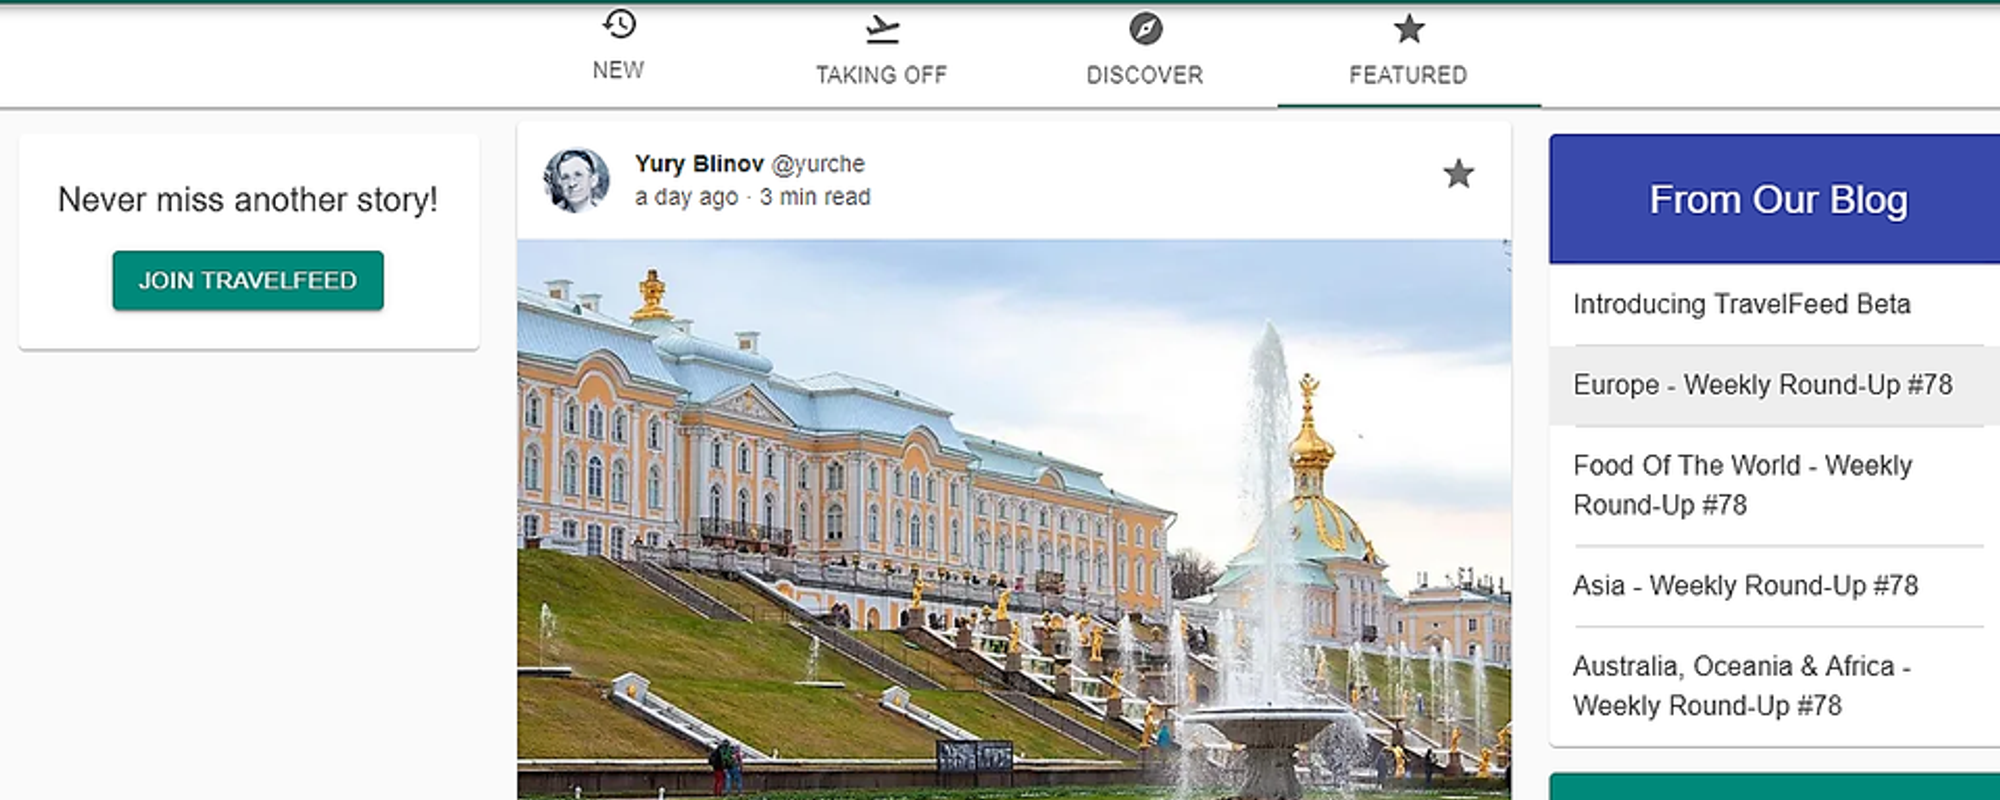 Great news for travelers: TravelFeed launched their own (awesome) platform